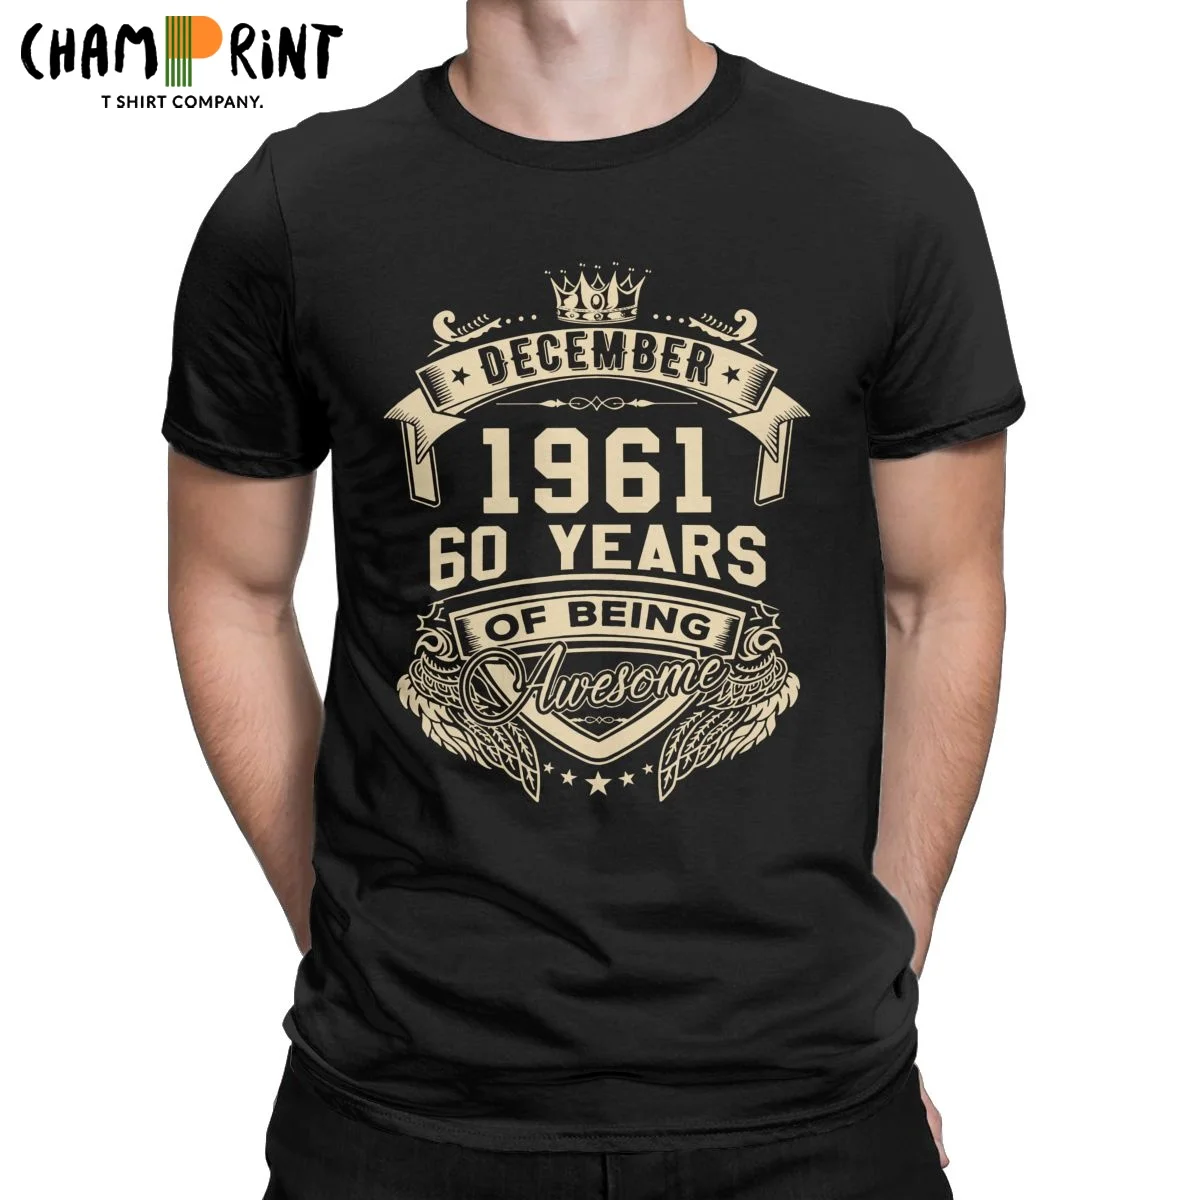 

Humor Born In December 1961 60 Years Of Being Awesome Limited T-Shirt for Men Cotton T Shirts Tees Gift Idea Clothes